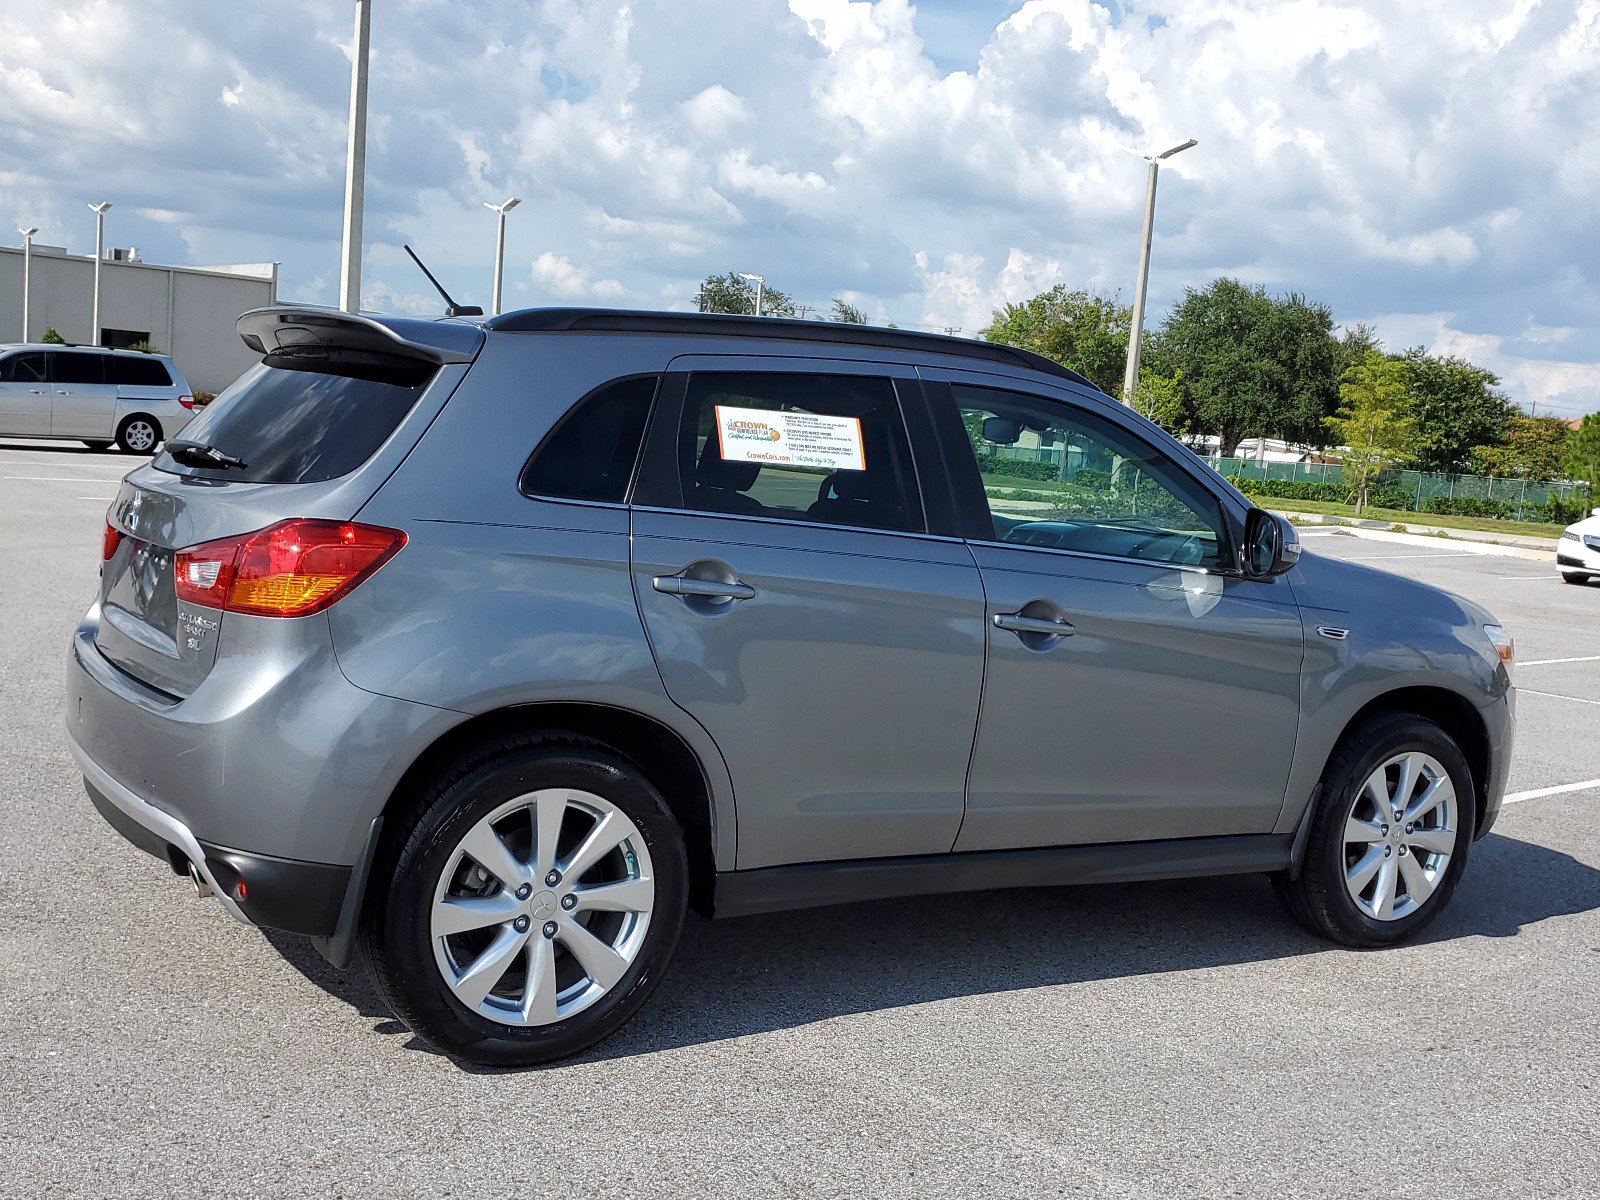 PreOwned 2015 Mitsubishi Outlander Sport 2.4 GT SUV in St